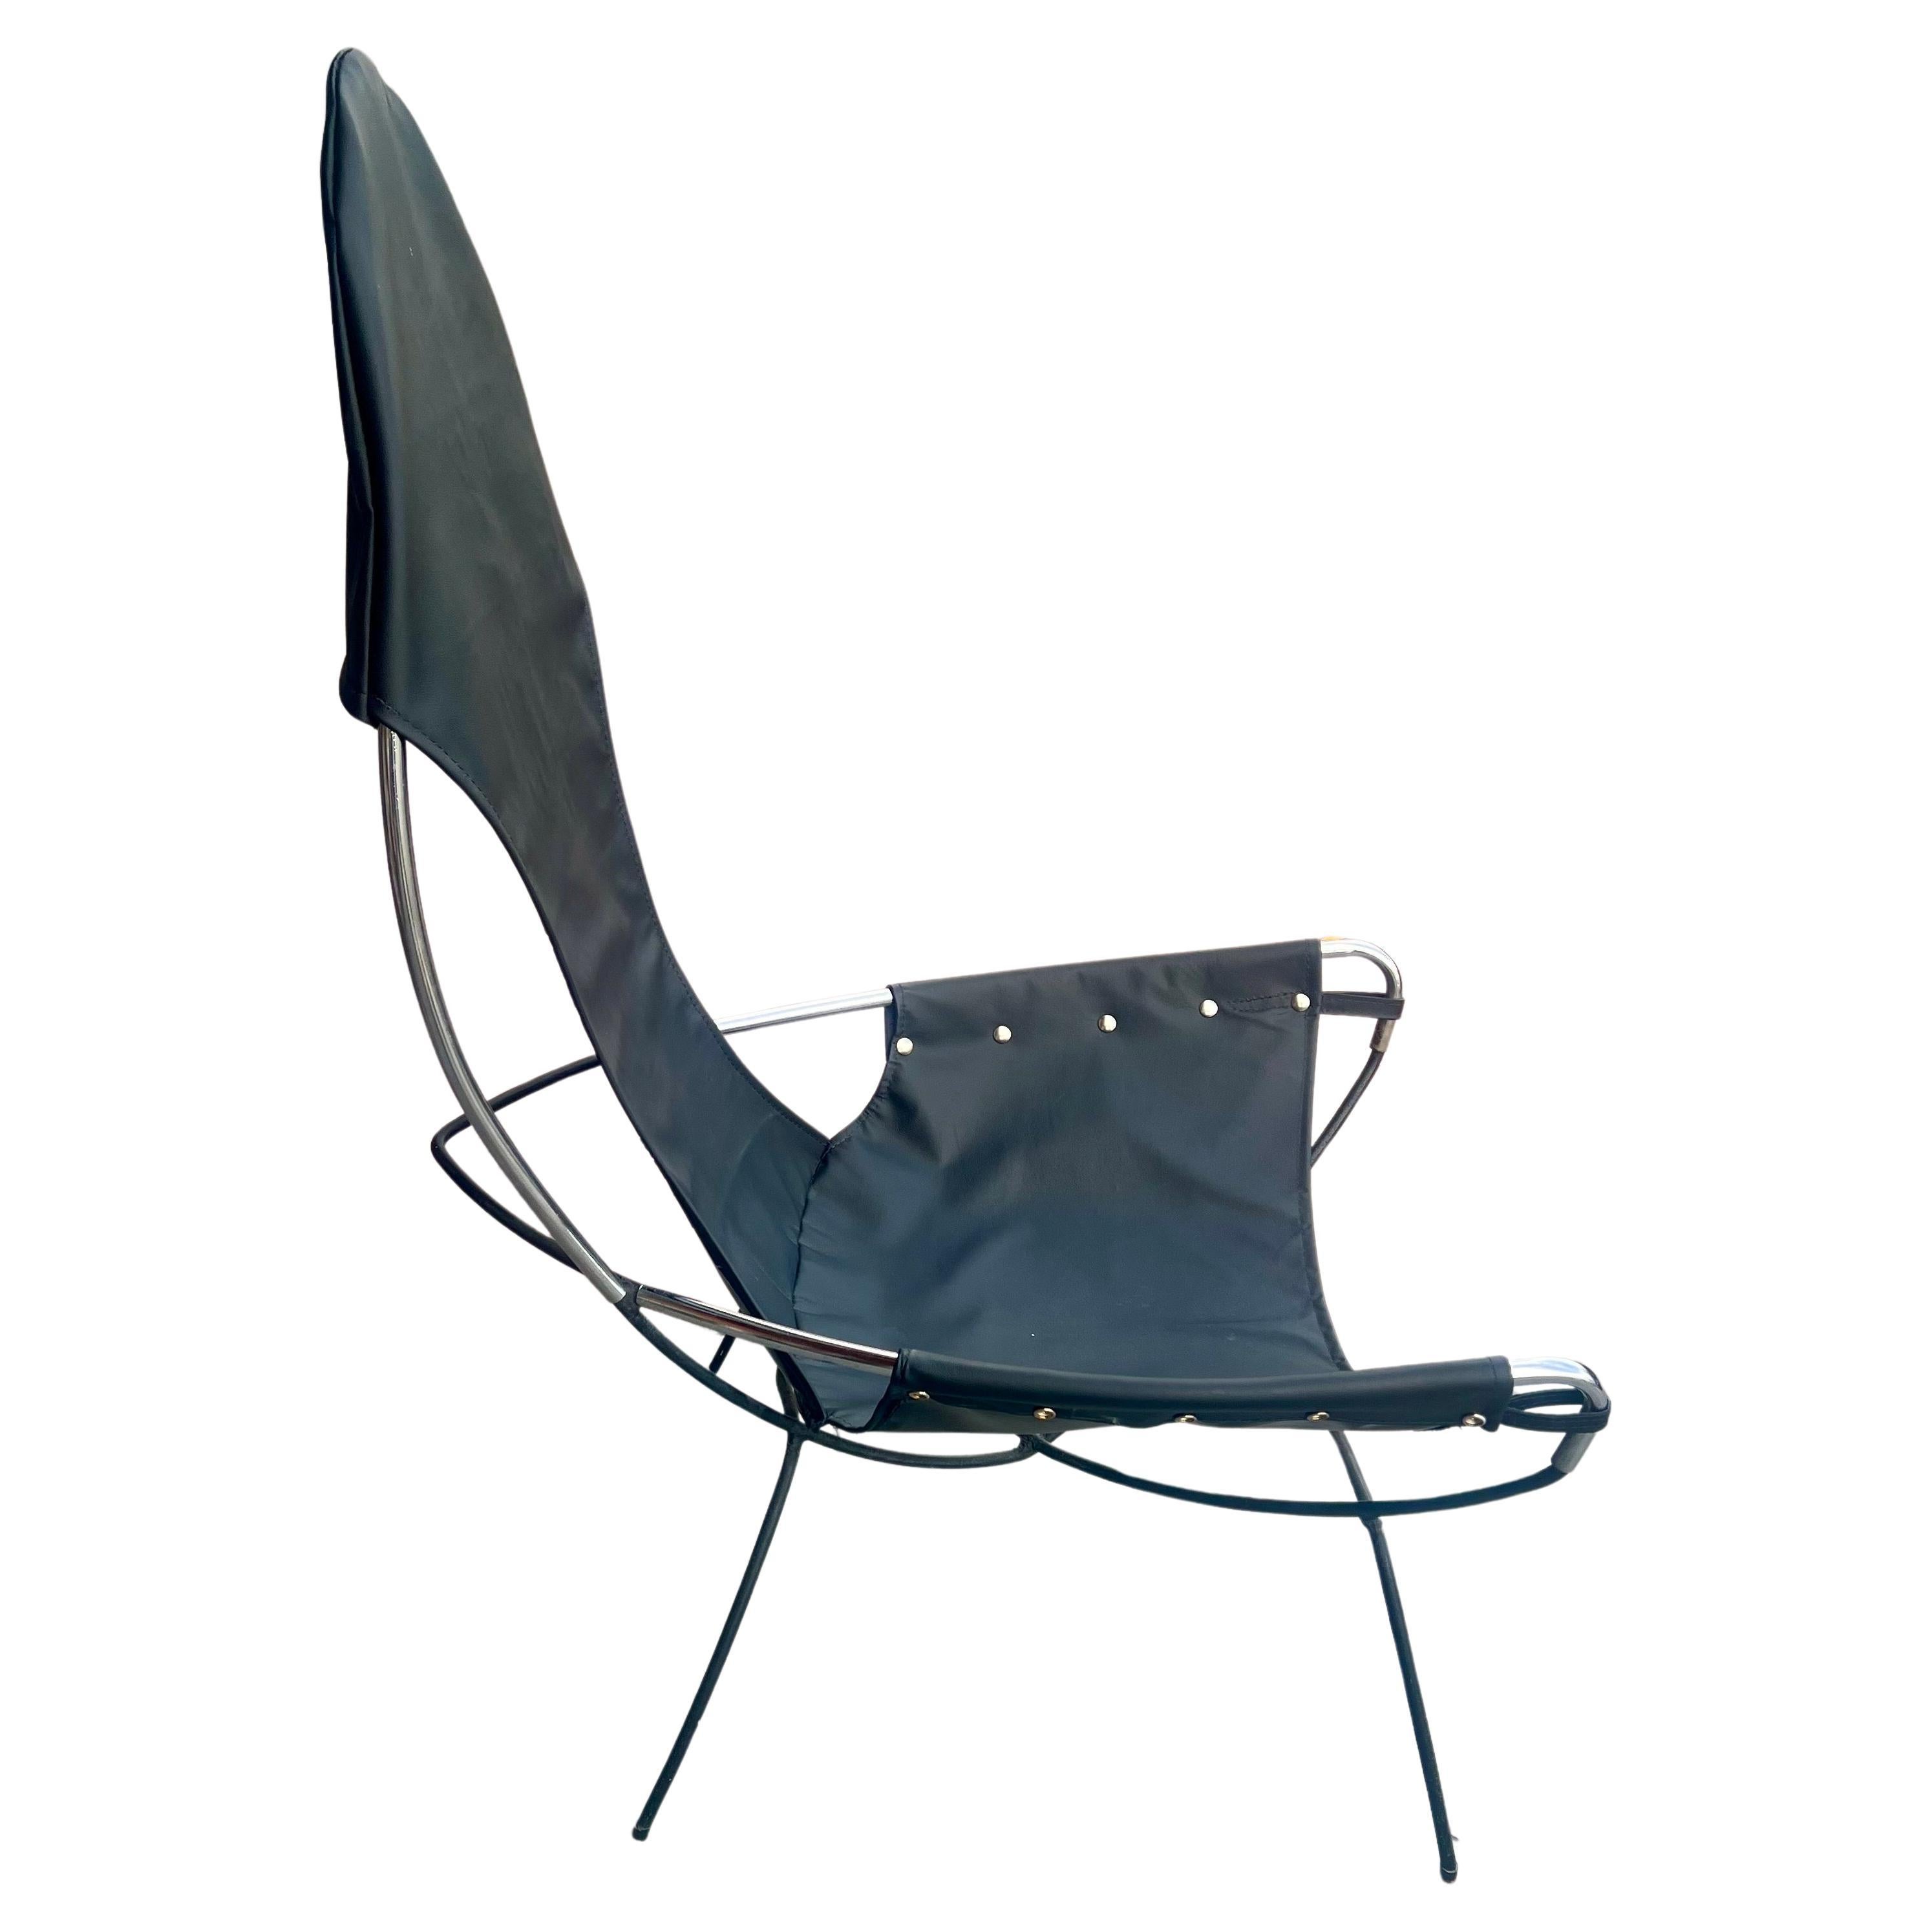 A unique single sling chair in chrome pipping, with a solid iron combination, Freshly Recovered in Black leather and riveted, the chair is in its original condition circa 1970s, the chair is comfy and light very clean condition.